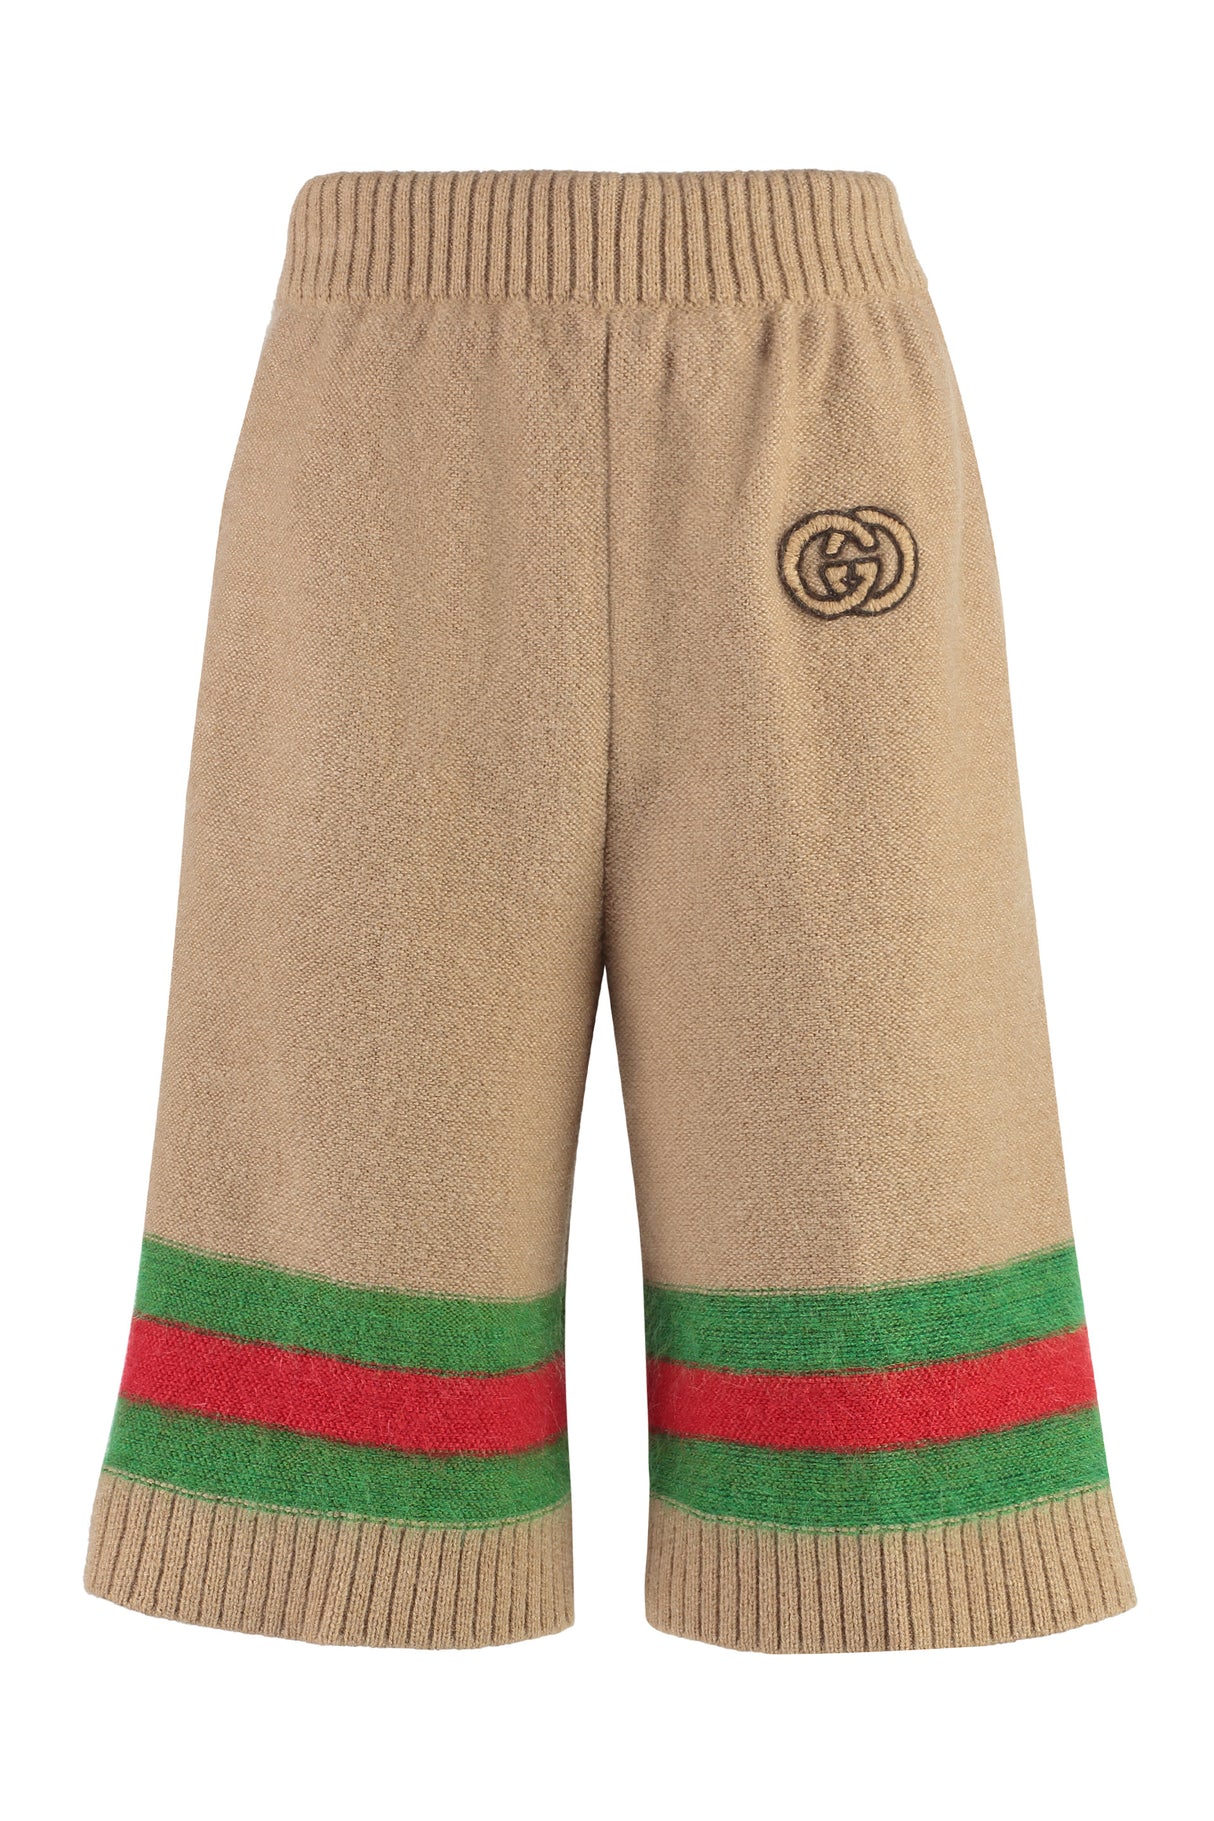 GUCCI Women's Knit Shorts with Green-Red-Green Detail in FW23 Collection